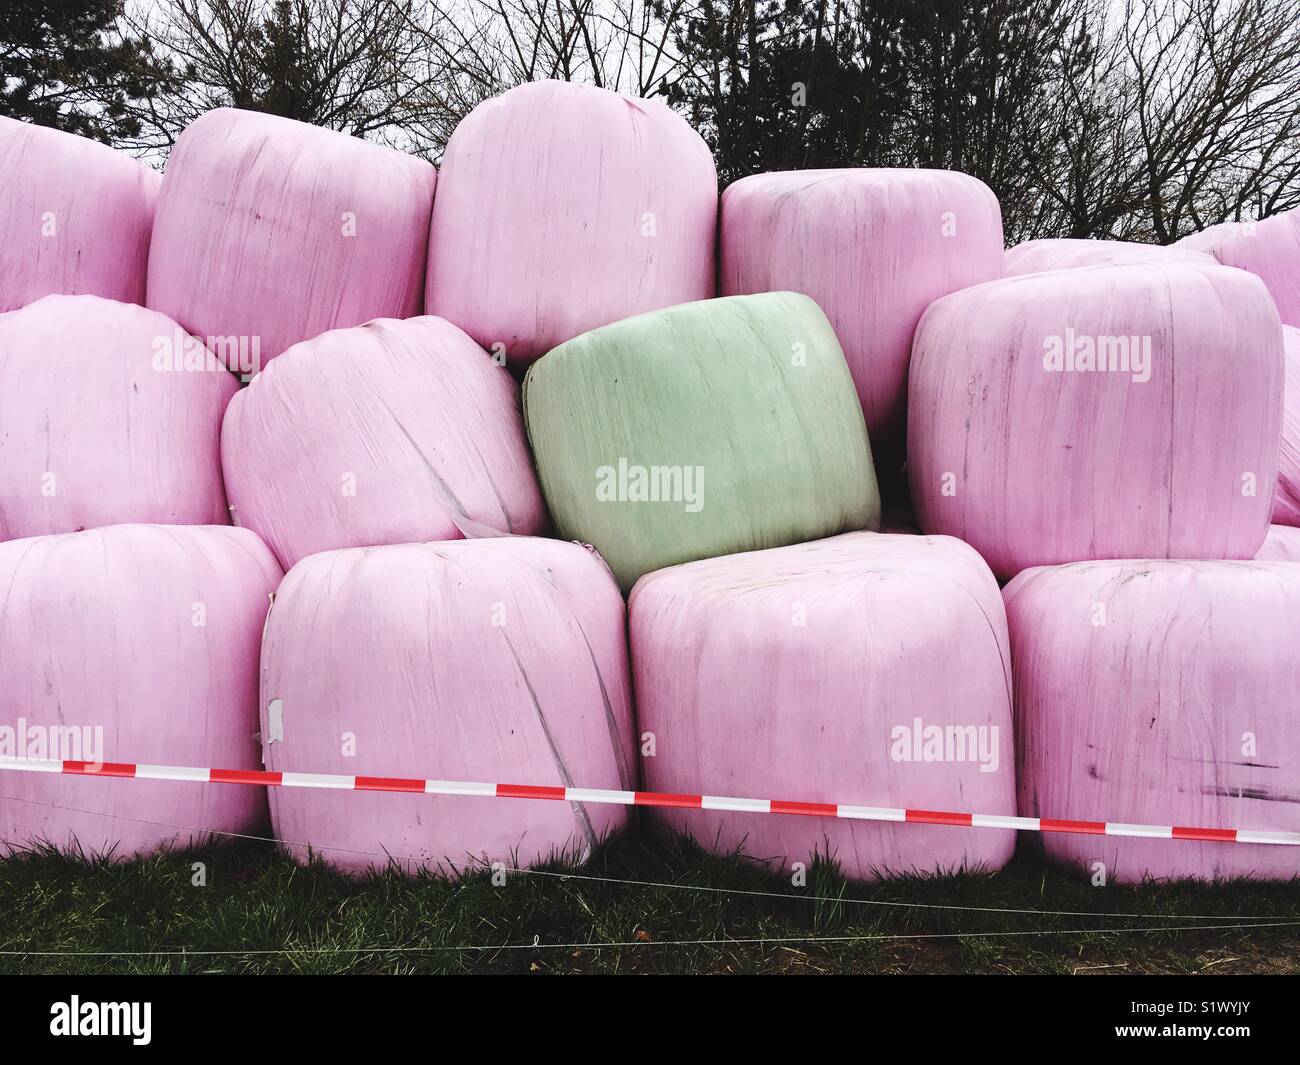 Stacked silage bales Stock Photo